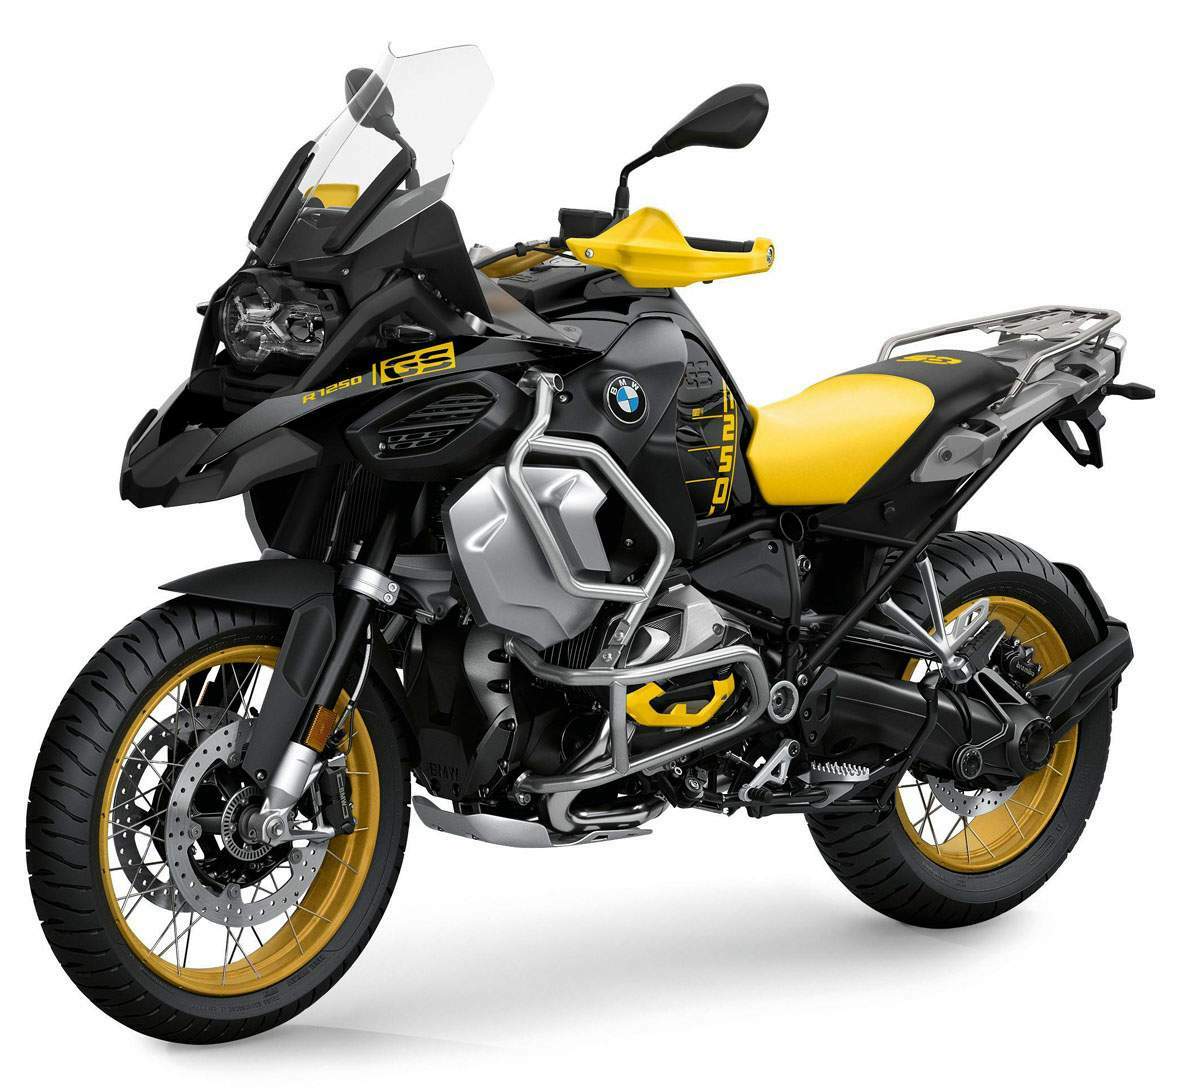 BMW R 1250GS Adventure technical specifications